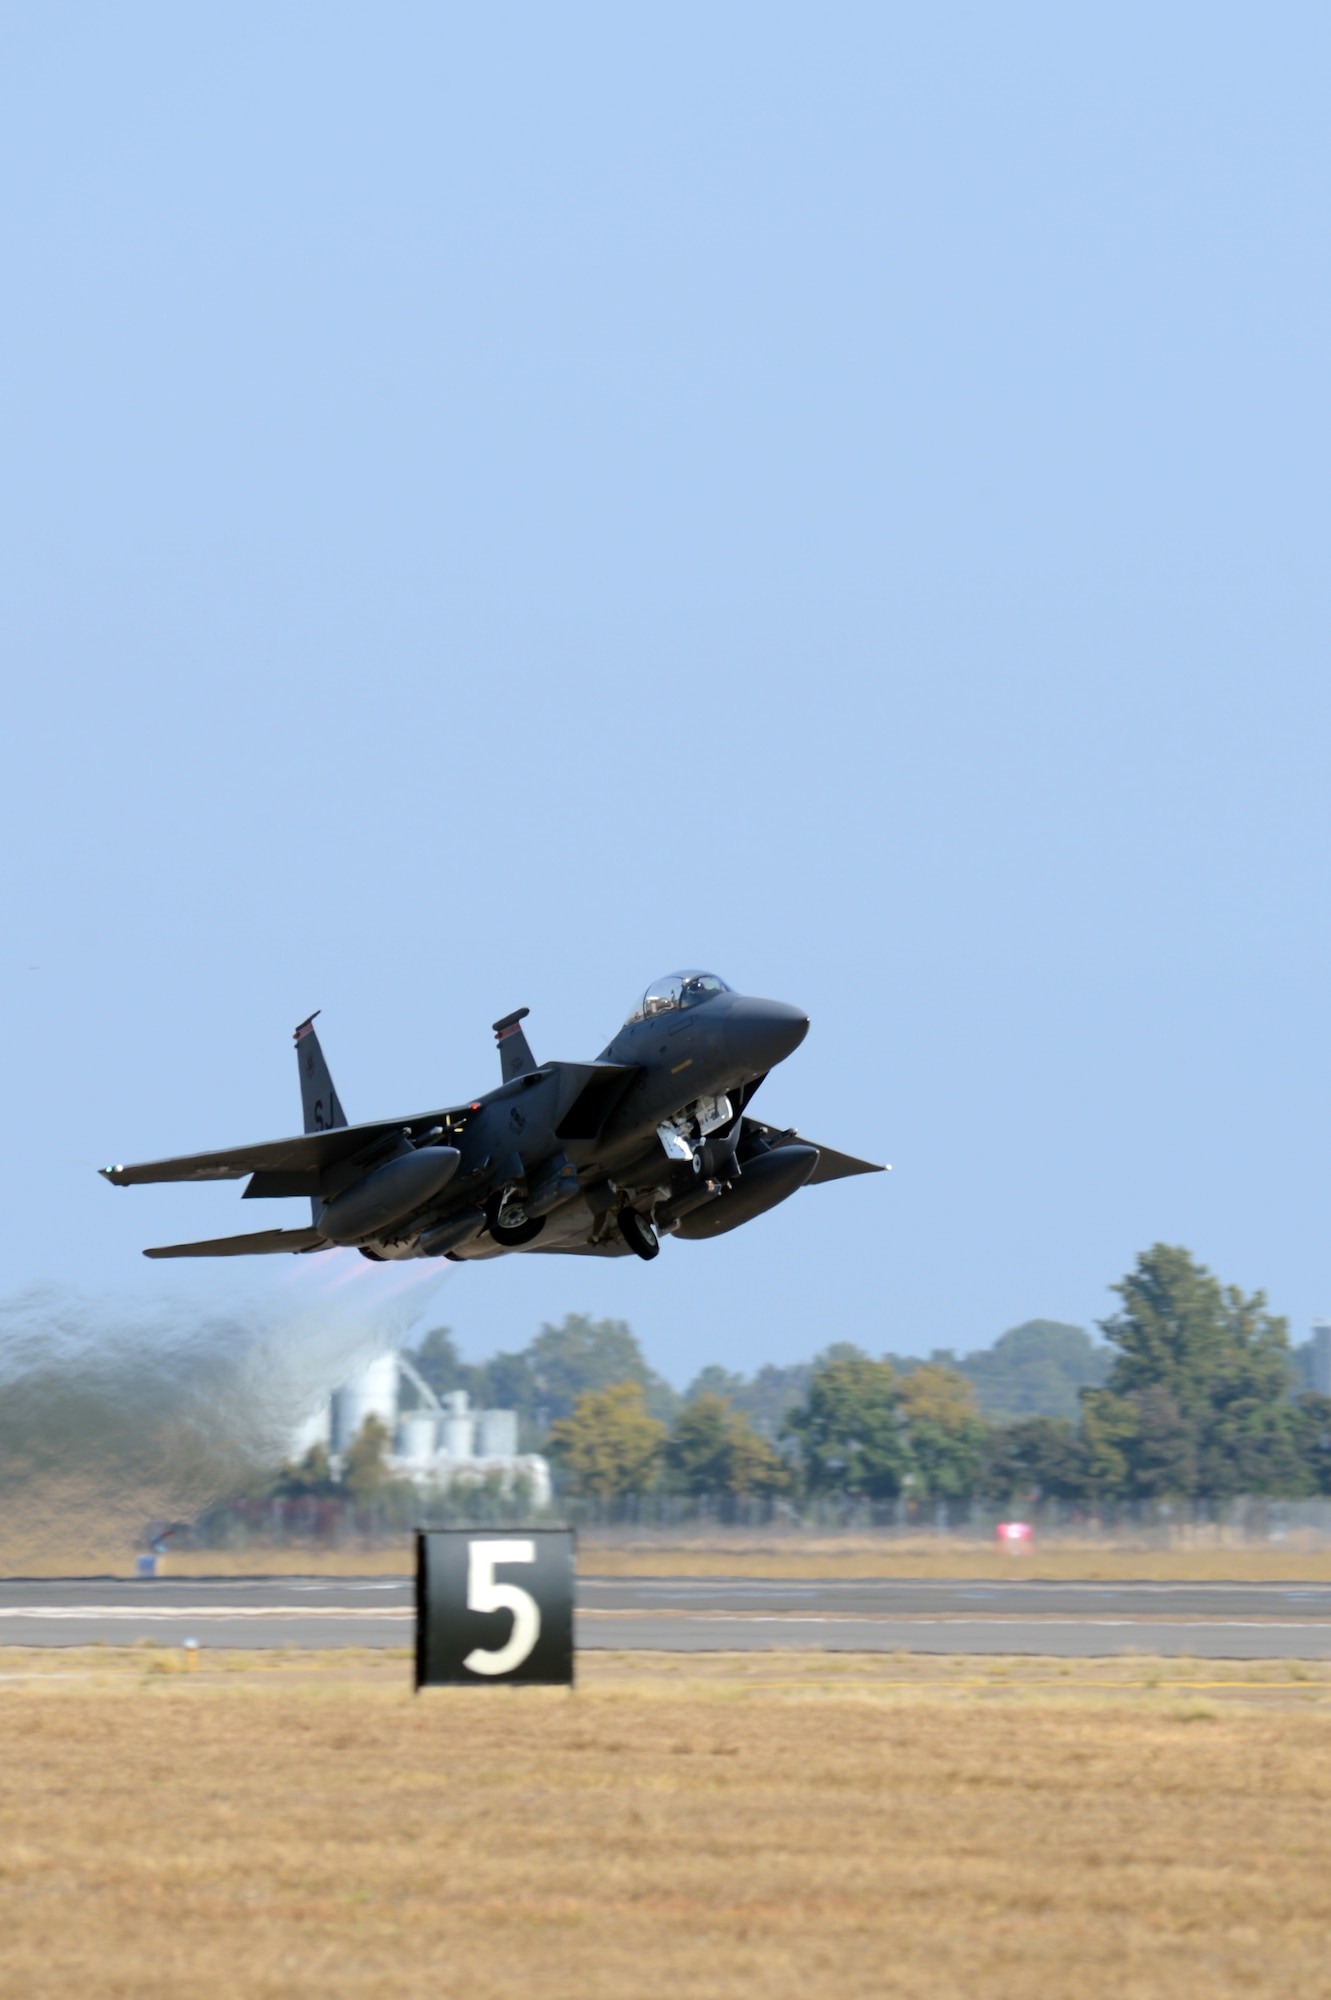 An F-15E Strike Eagle assigned to the 4th Fighter Wing at Seymour Johnson Air Force Base, North Carolina, departs the flightline at Barksdale Air Force Base, La., Oct. 6, 2015. Several KC-135 Stratotankers, dozens of F-15s and more than 200 Airmen from Seymour Johnson temporarily relocated here, Oct. 1, to avoid potential damage caused by Hurricane Joaquin. (U.S. Air Force photo/Senior Airman Joseph A. Pagán Jr.)